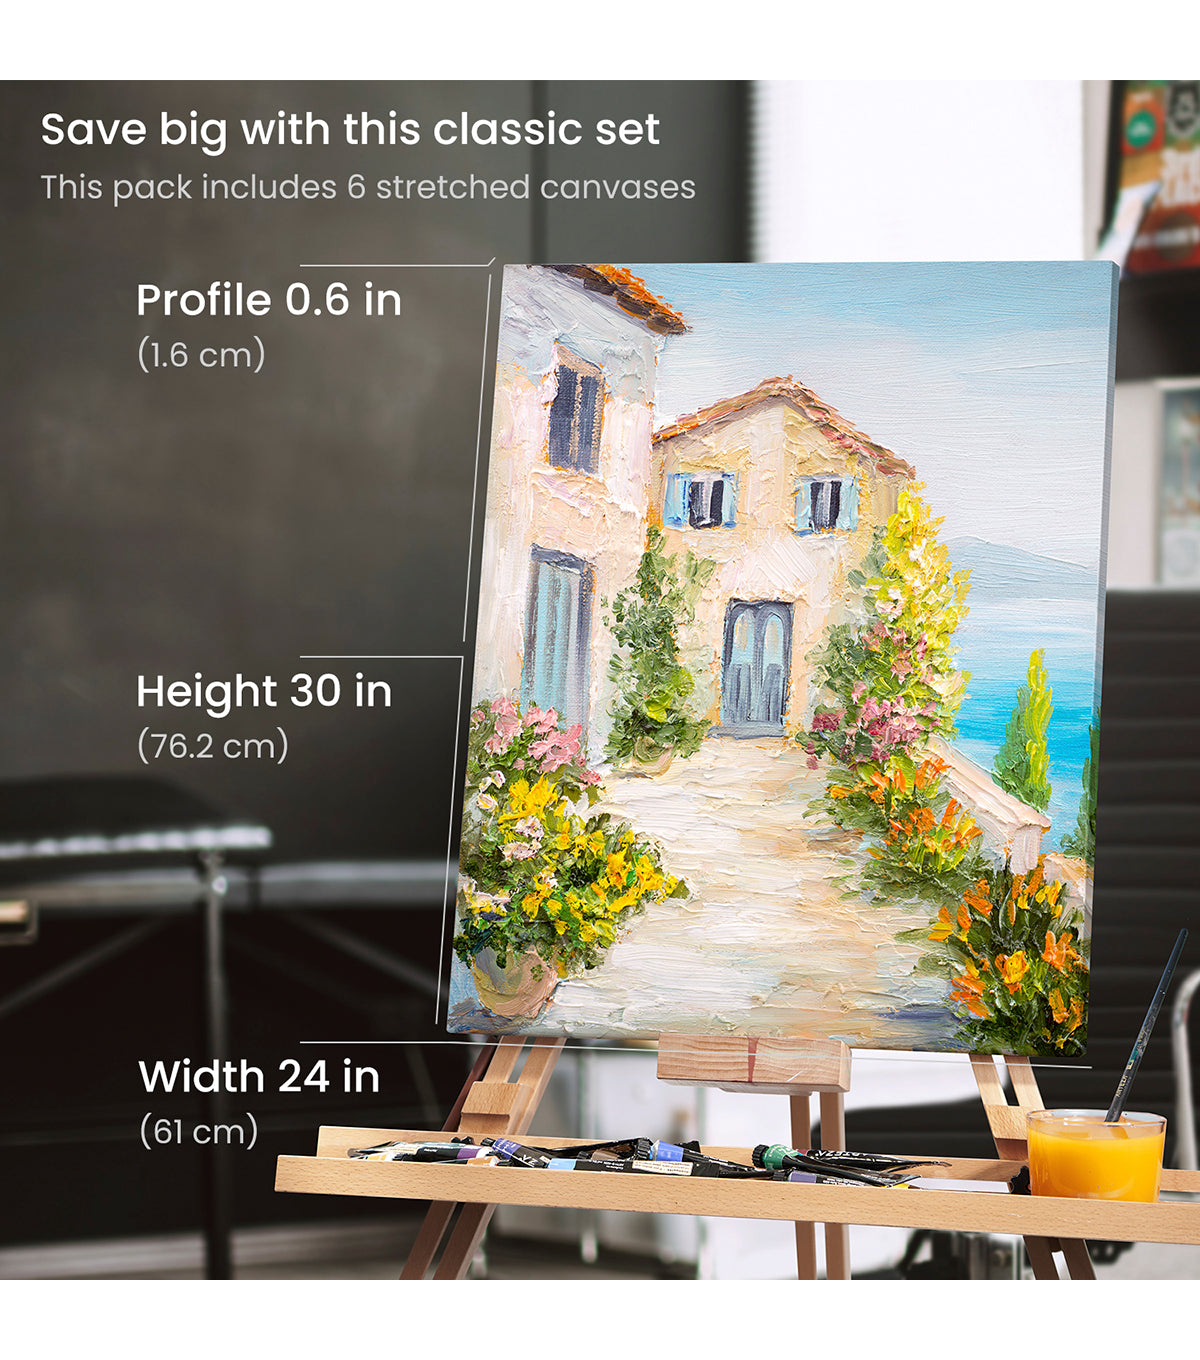 Oil Painting: 5 Money-Saving Tips for Canvases